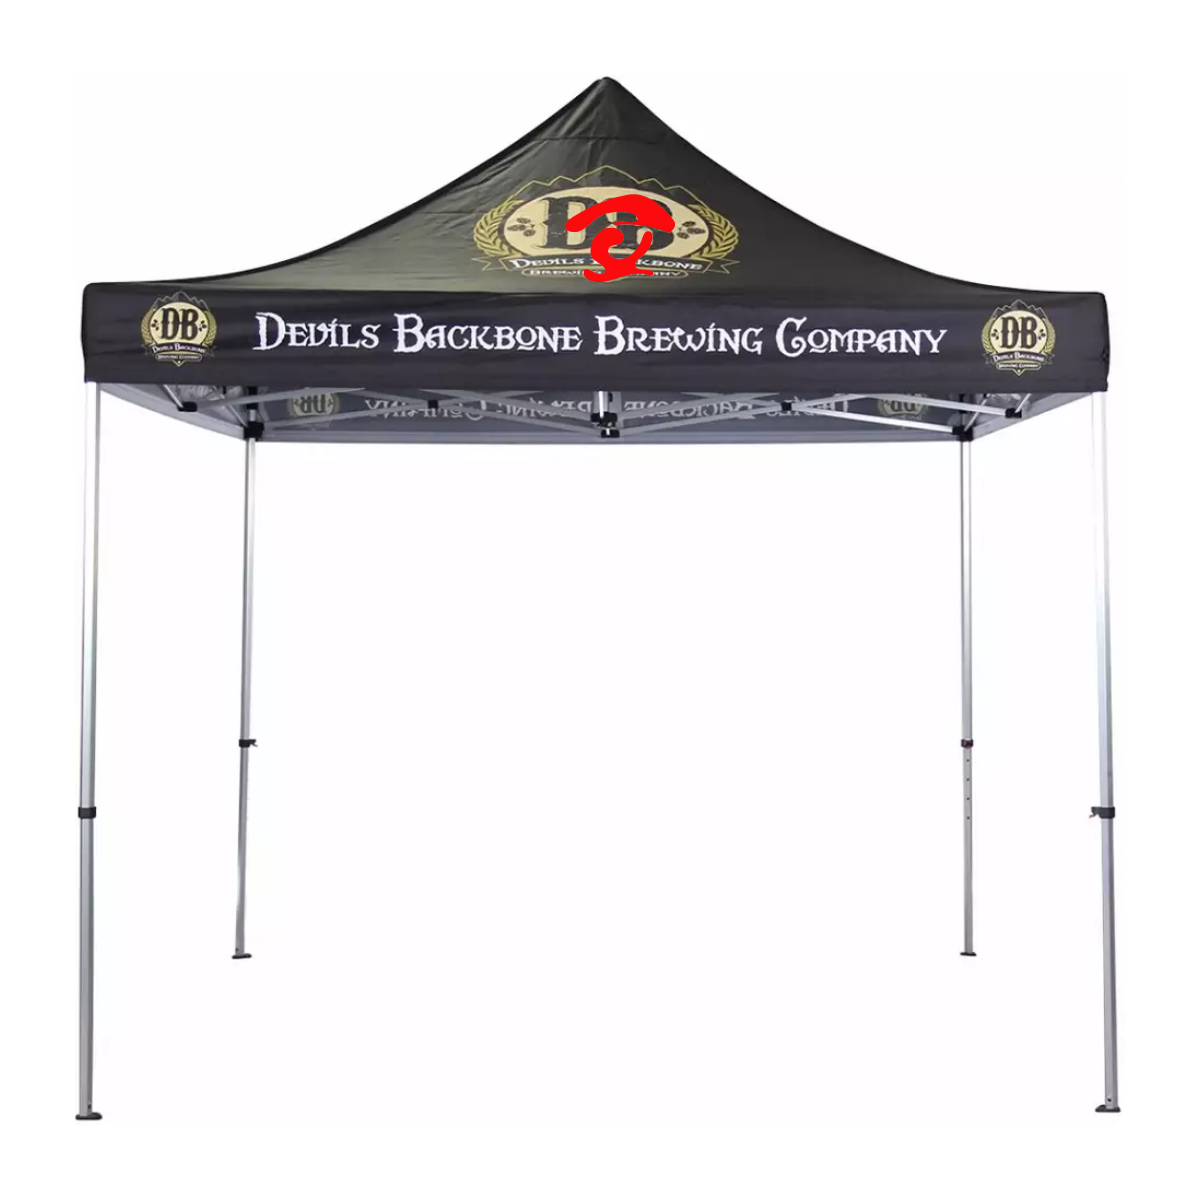 High Quality Outdoor Pop Up Fold Aluminum Trade Show Tent Gazebo, Exhibition Sports Event Marquee Custom Full Color Printed Advertising Promotion Canopy Tent